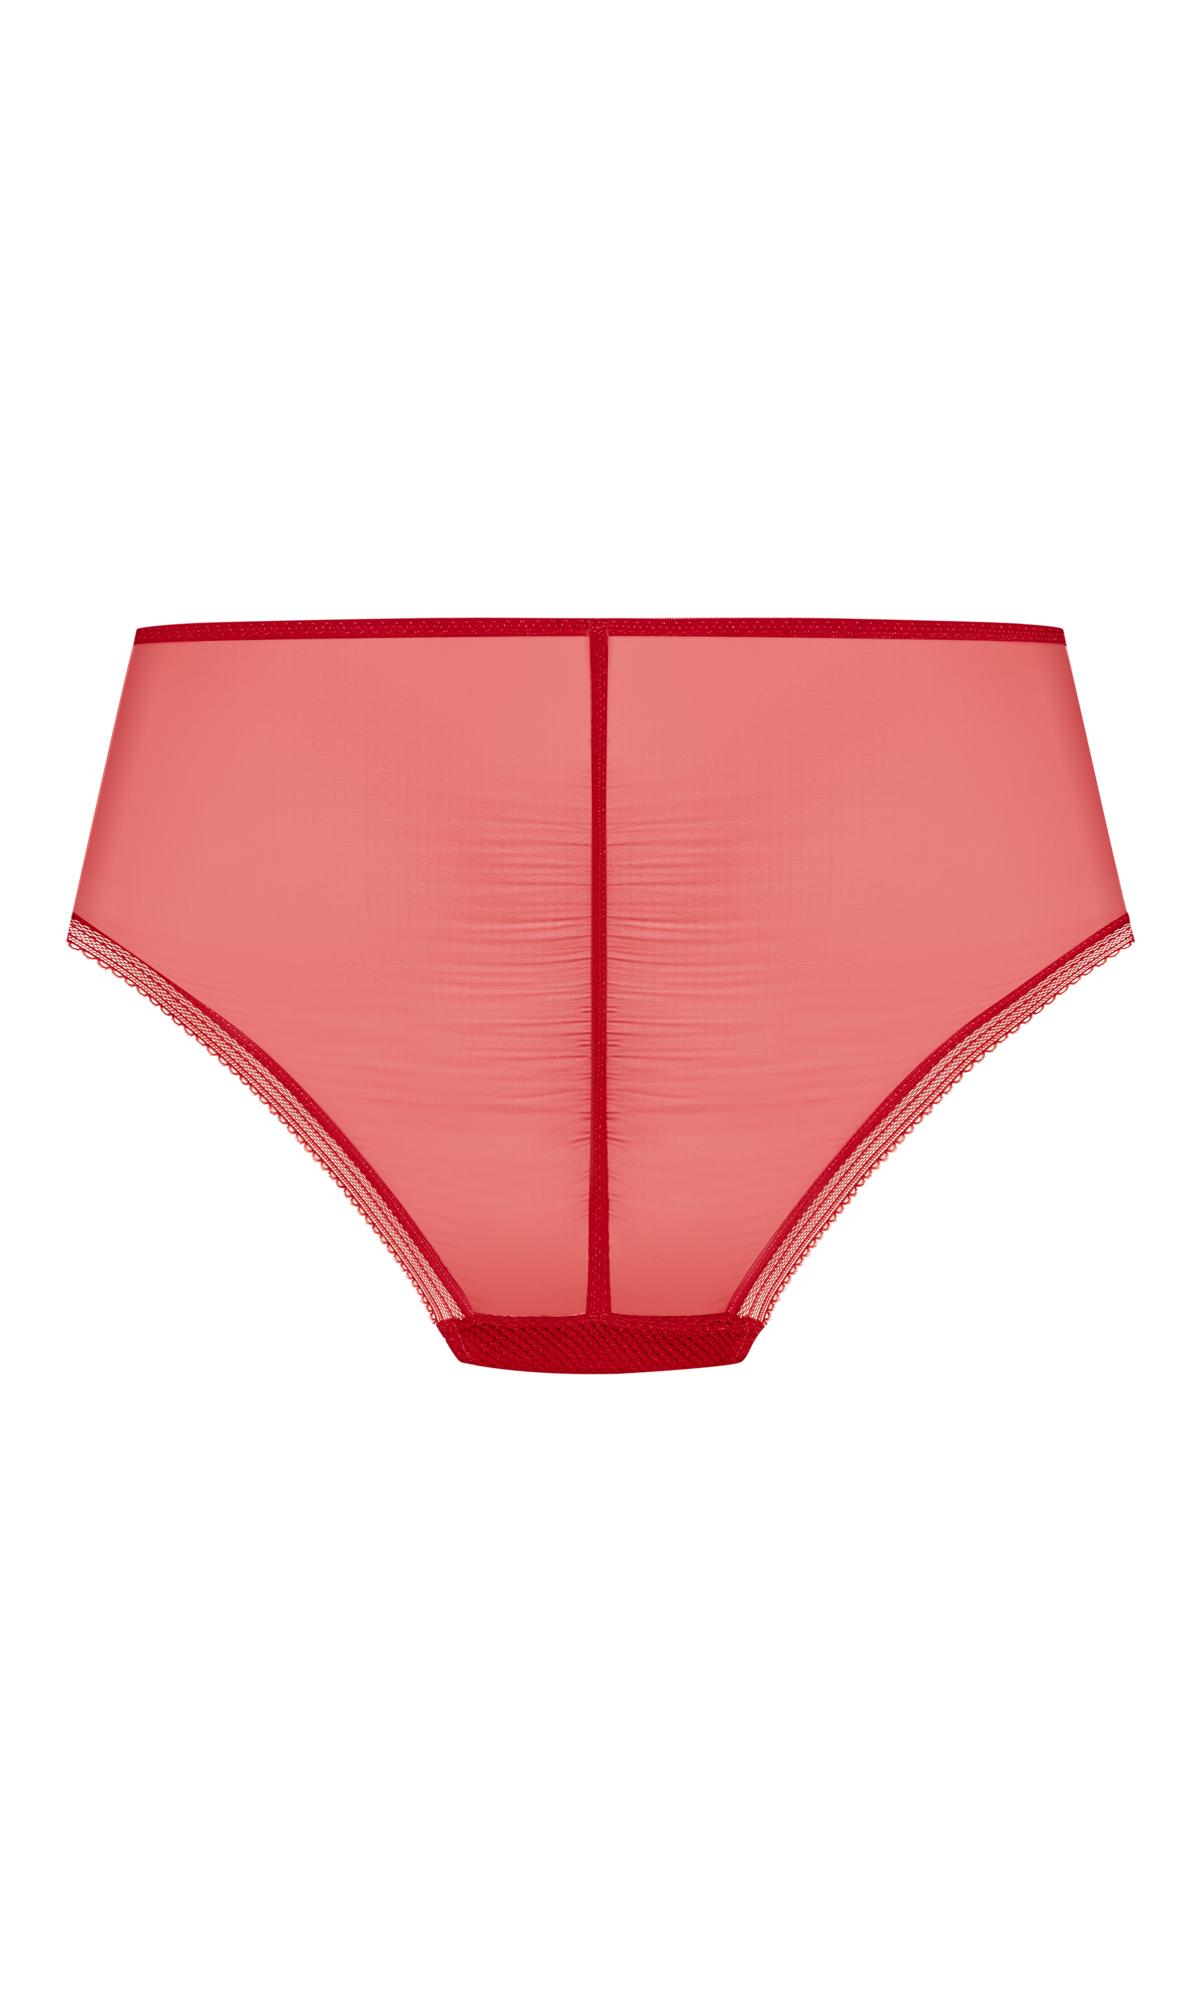 Evans Ruby Red Lace Hi-Briefs 3